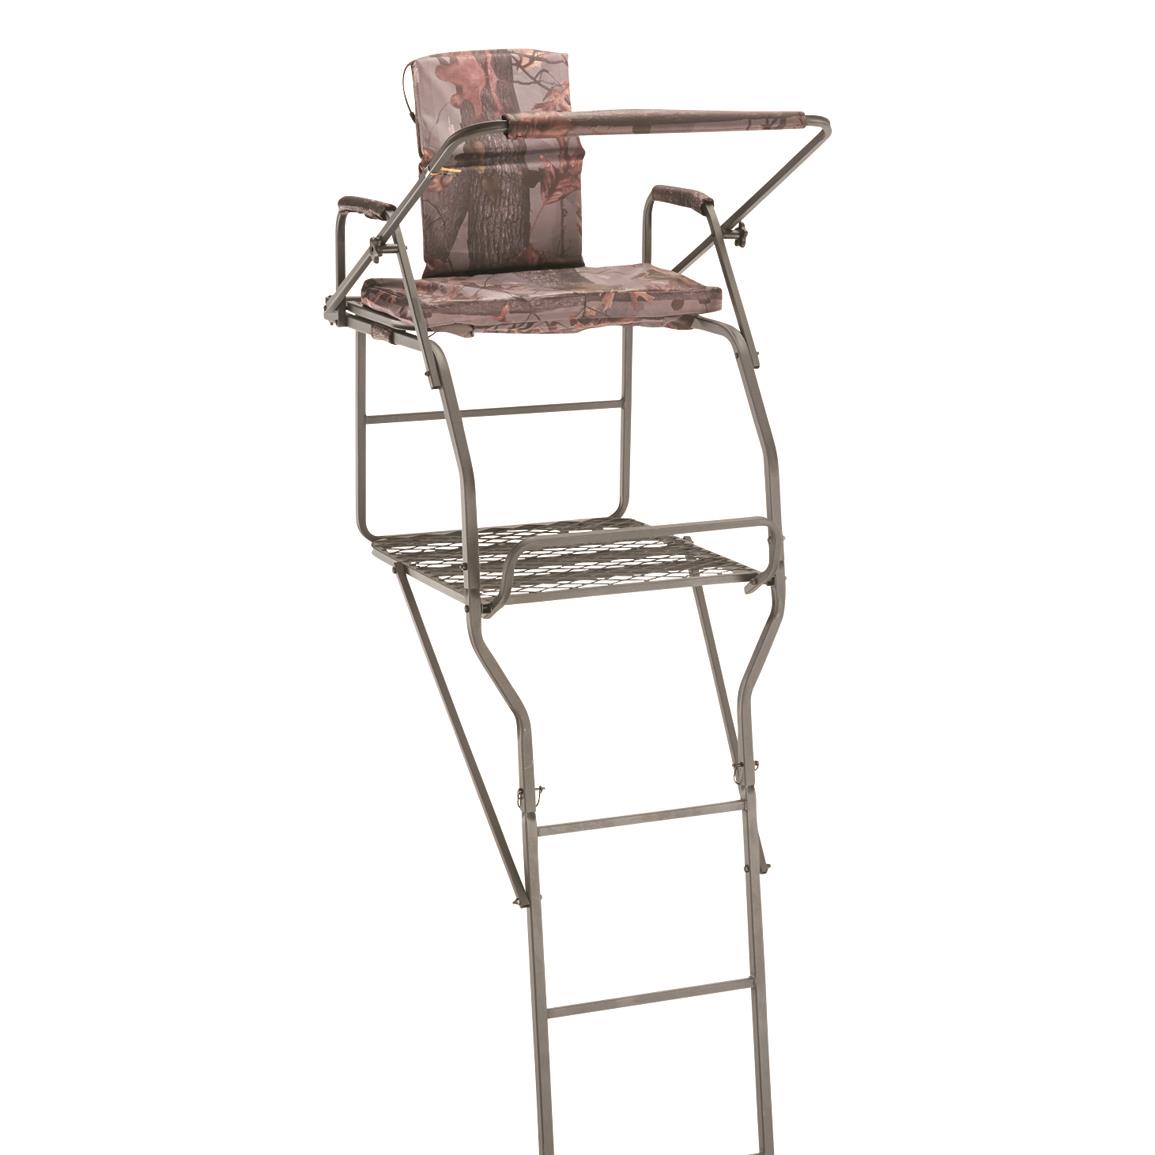 Guide Gear 18' Ultra Comfort Ladder Tree Stand 